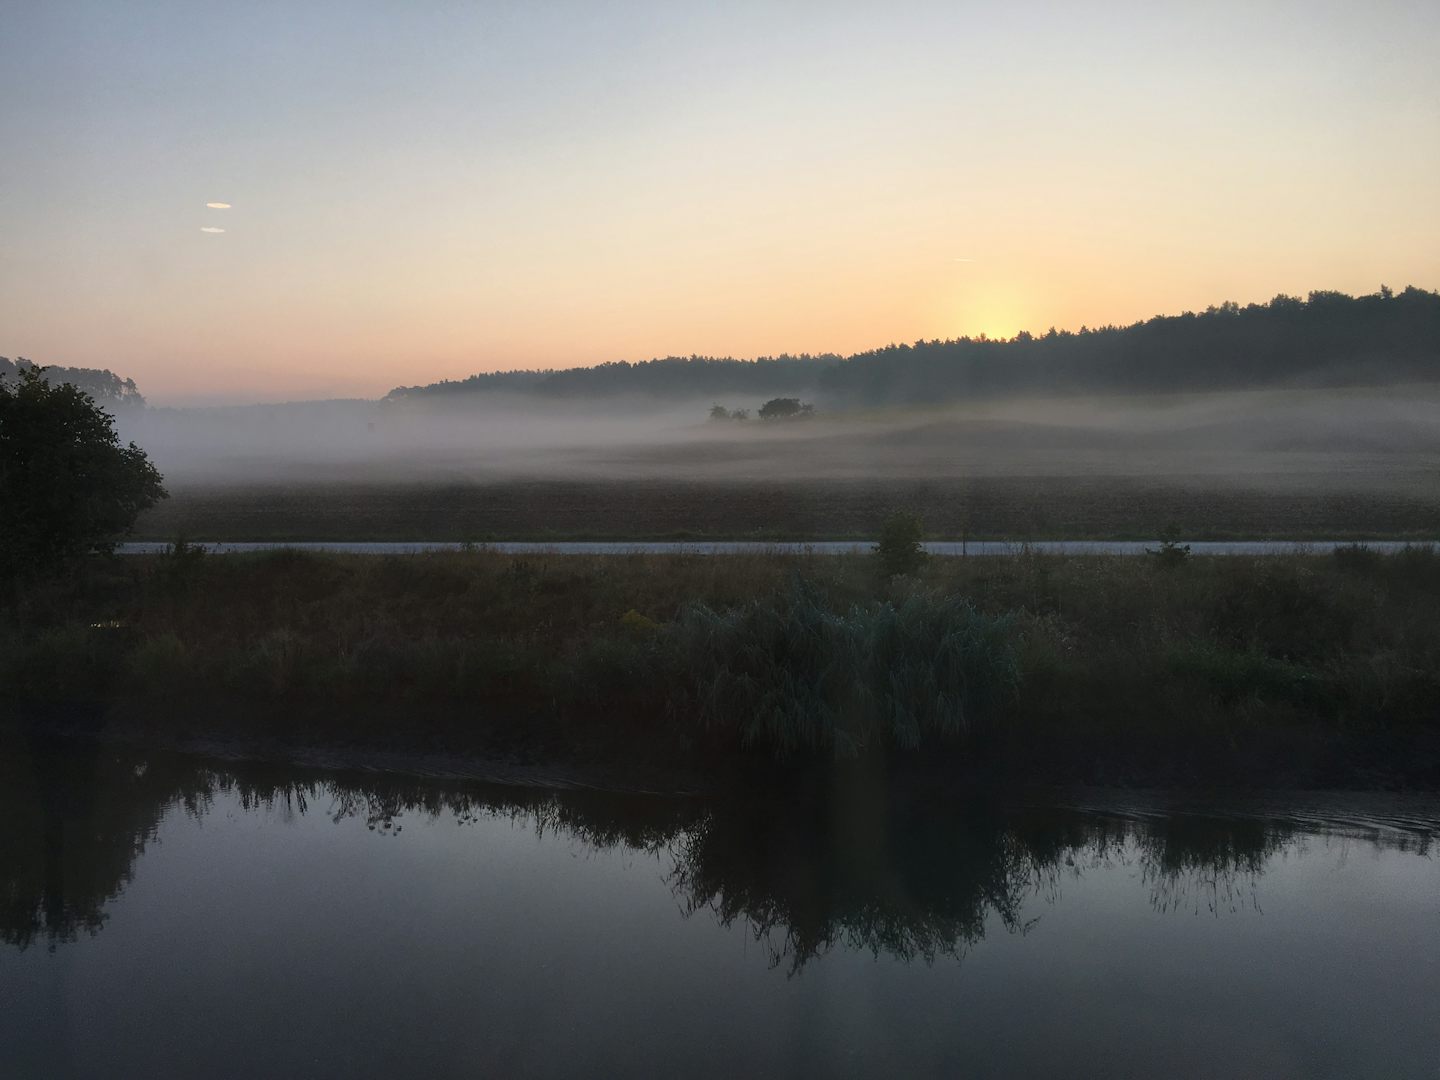 Early morning mist on the Danube.